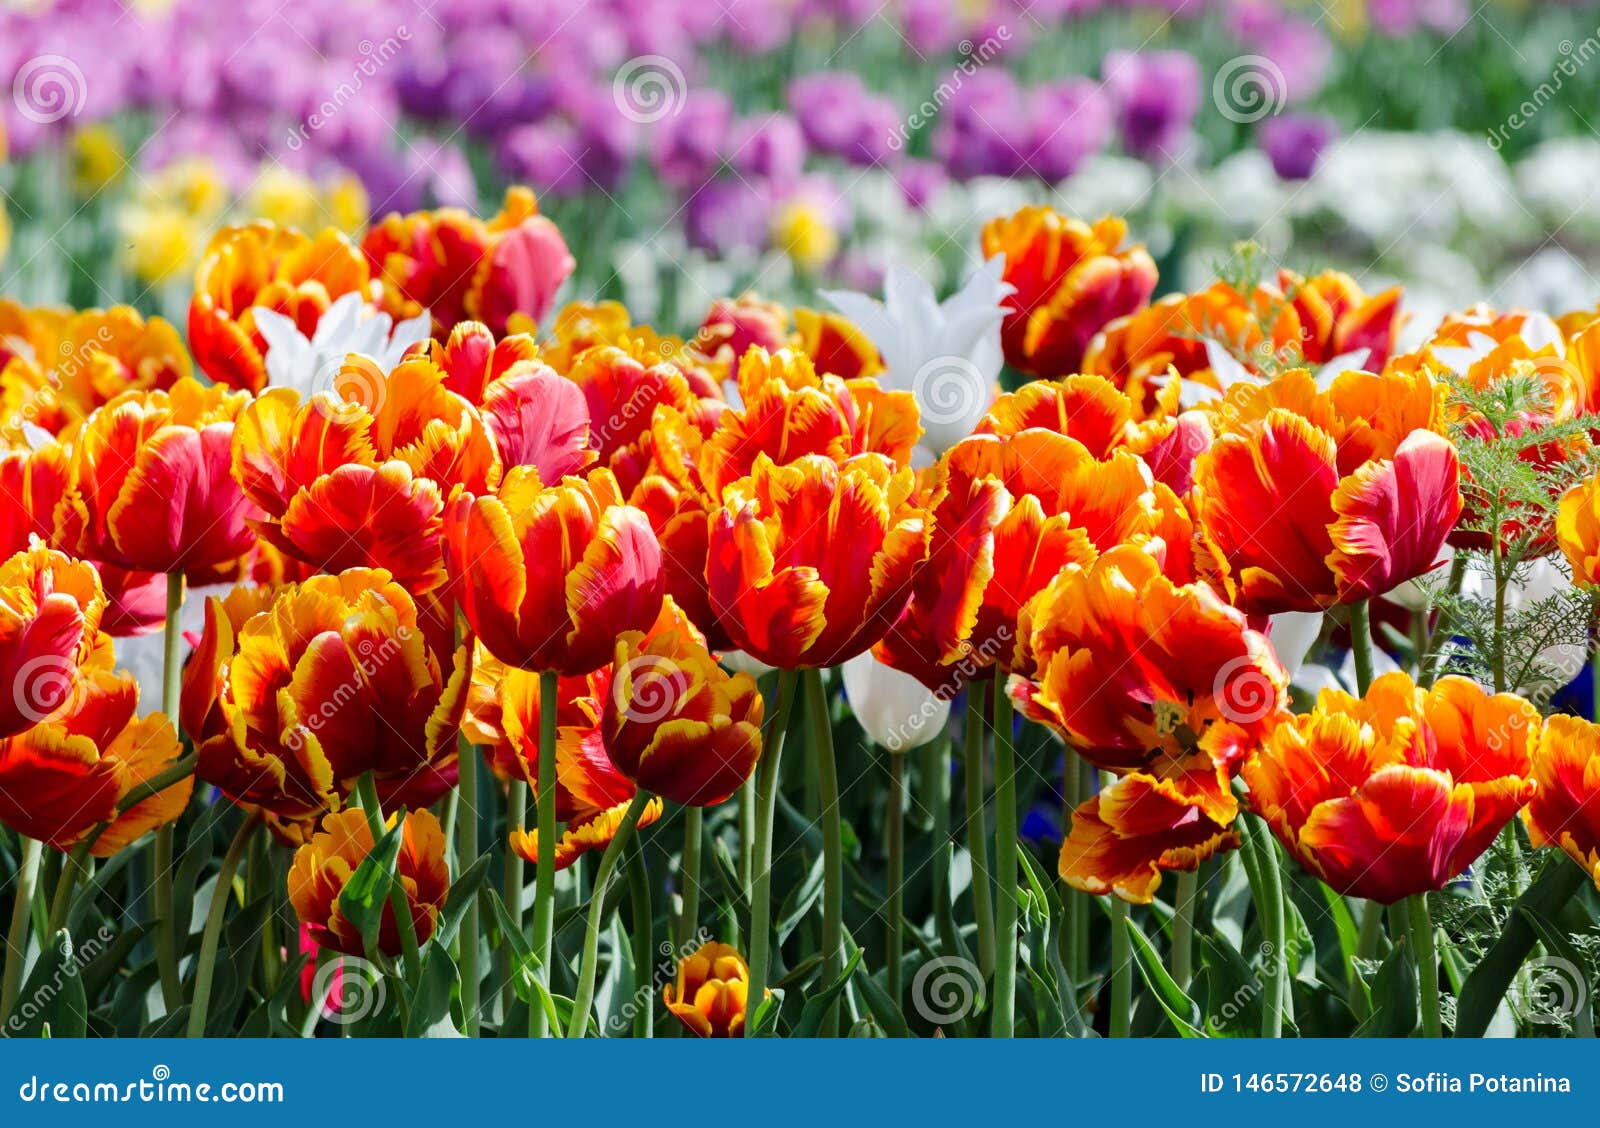 Large Blooming Flower Bed with Scarlet Red and Yellow Hybrid Tulips ...